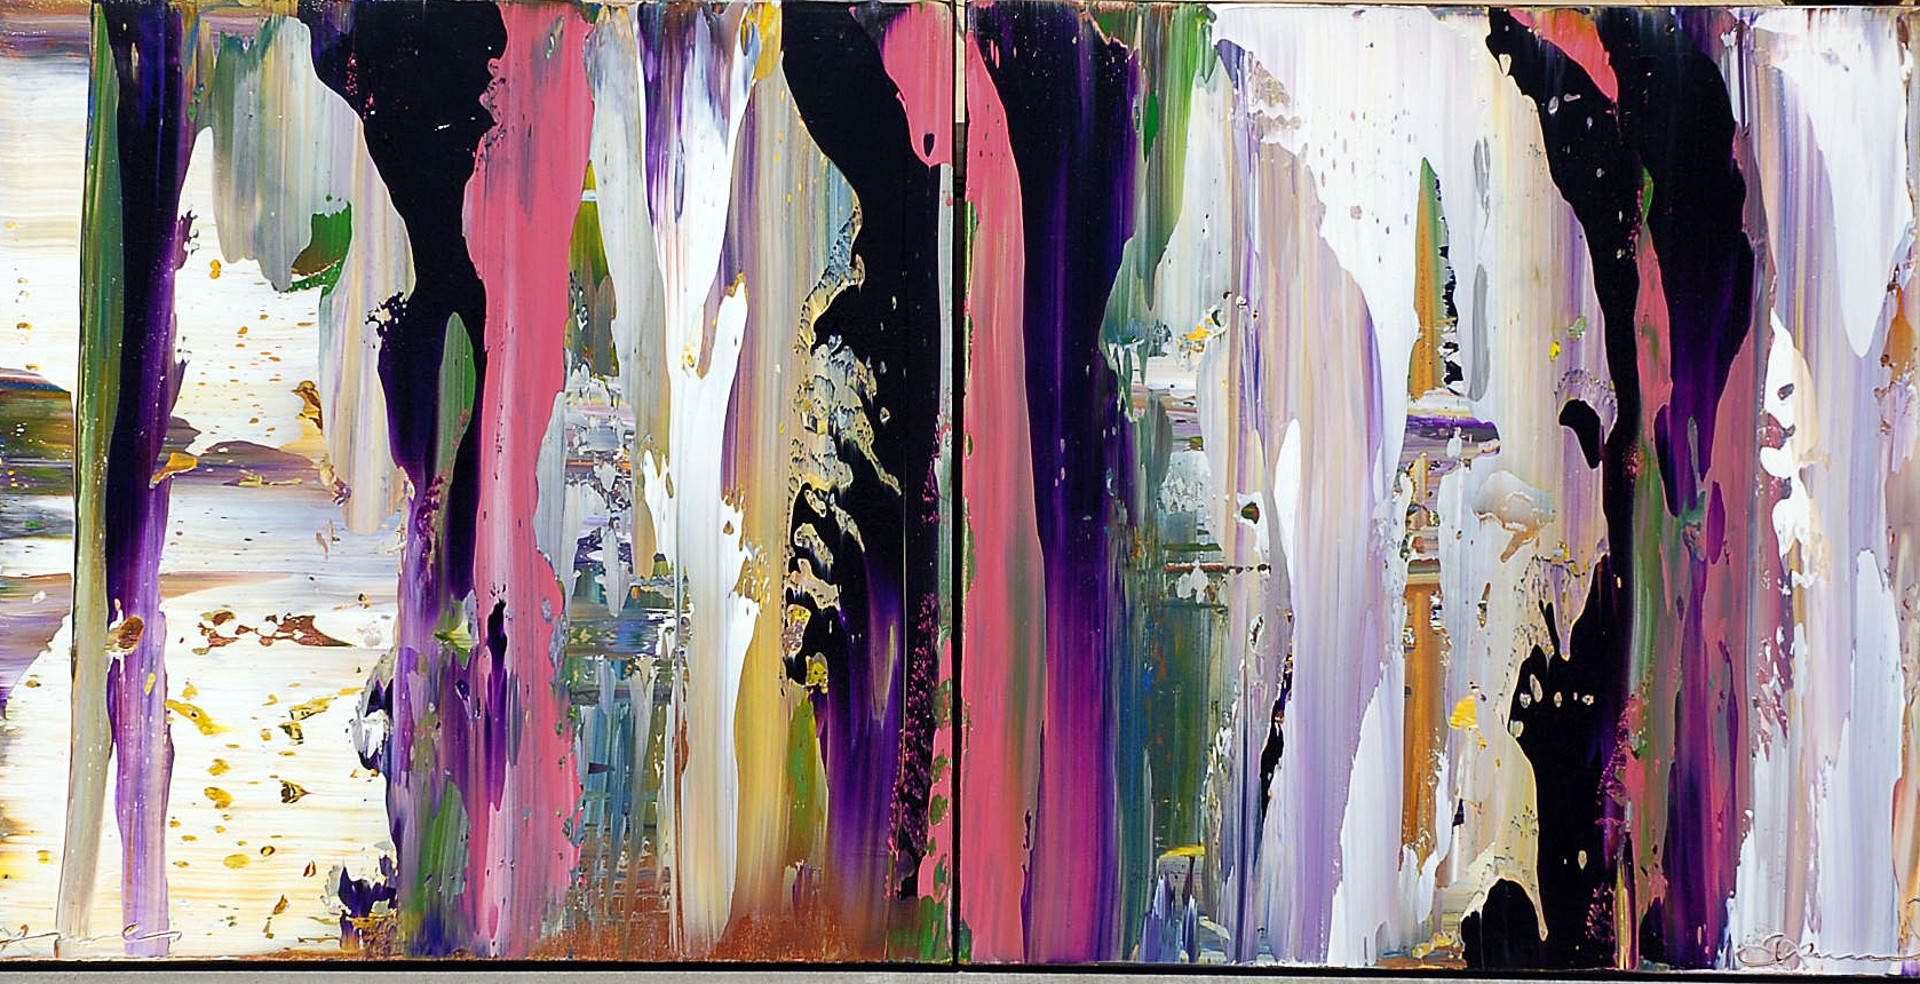 Spring Waits (diptych) by James C. Leonard